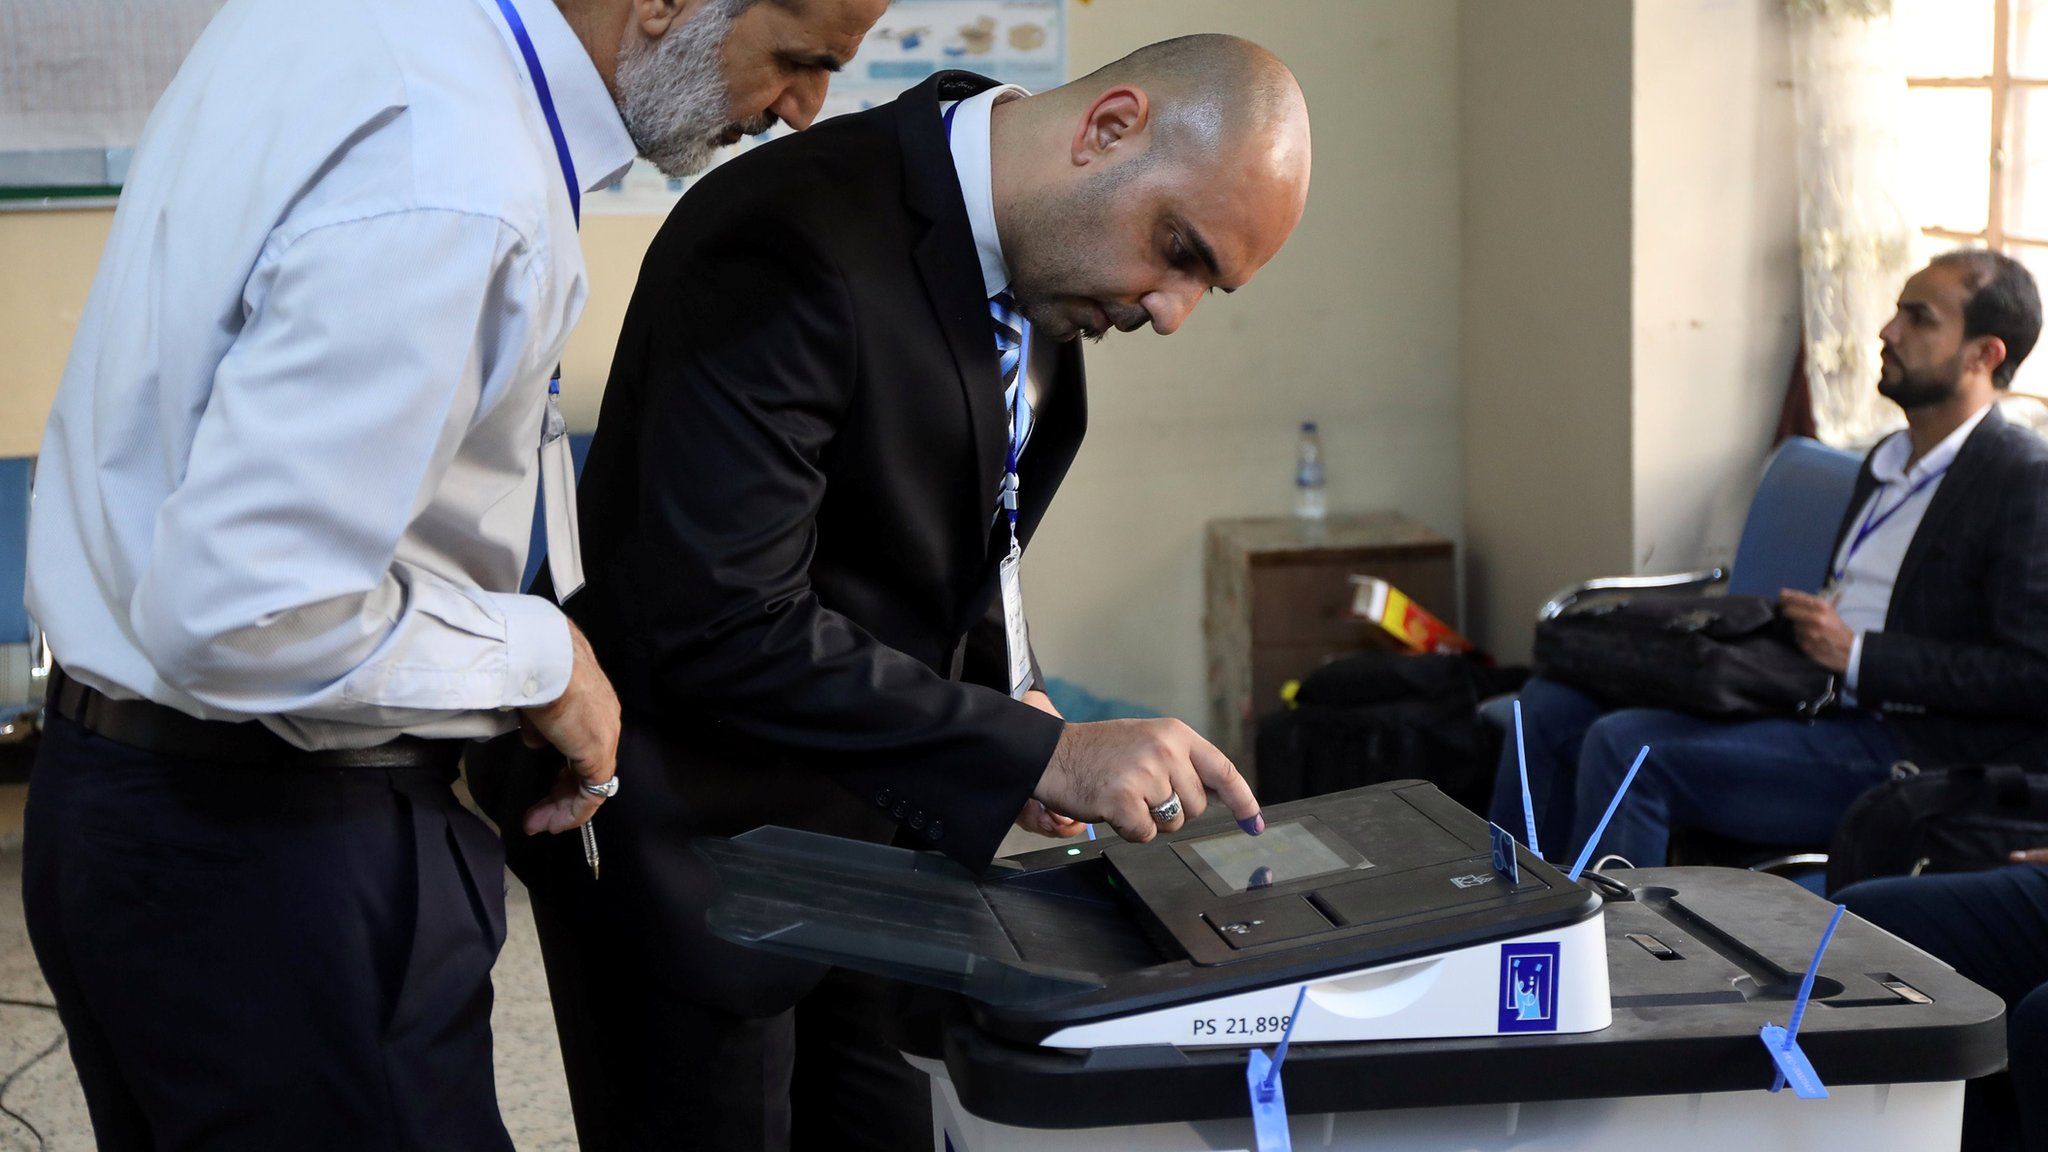 Iraqi election officials check an electronic vote-counting machine in Baghdad on 12 May 2018